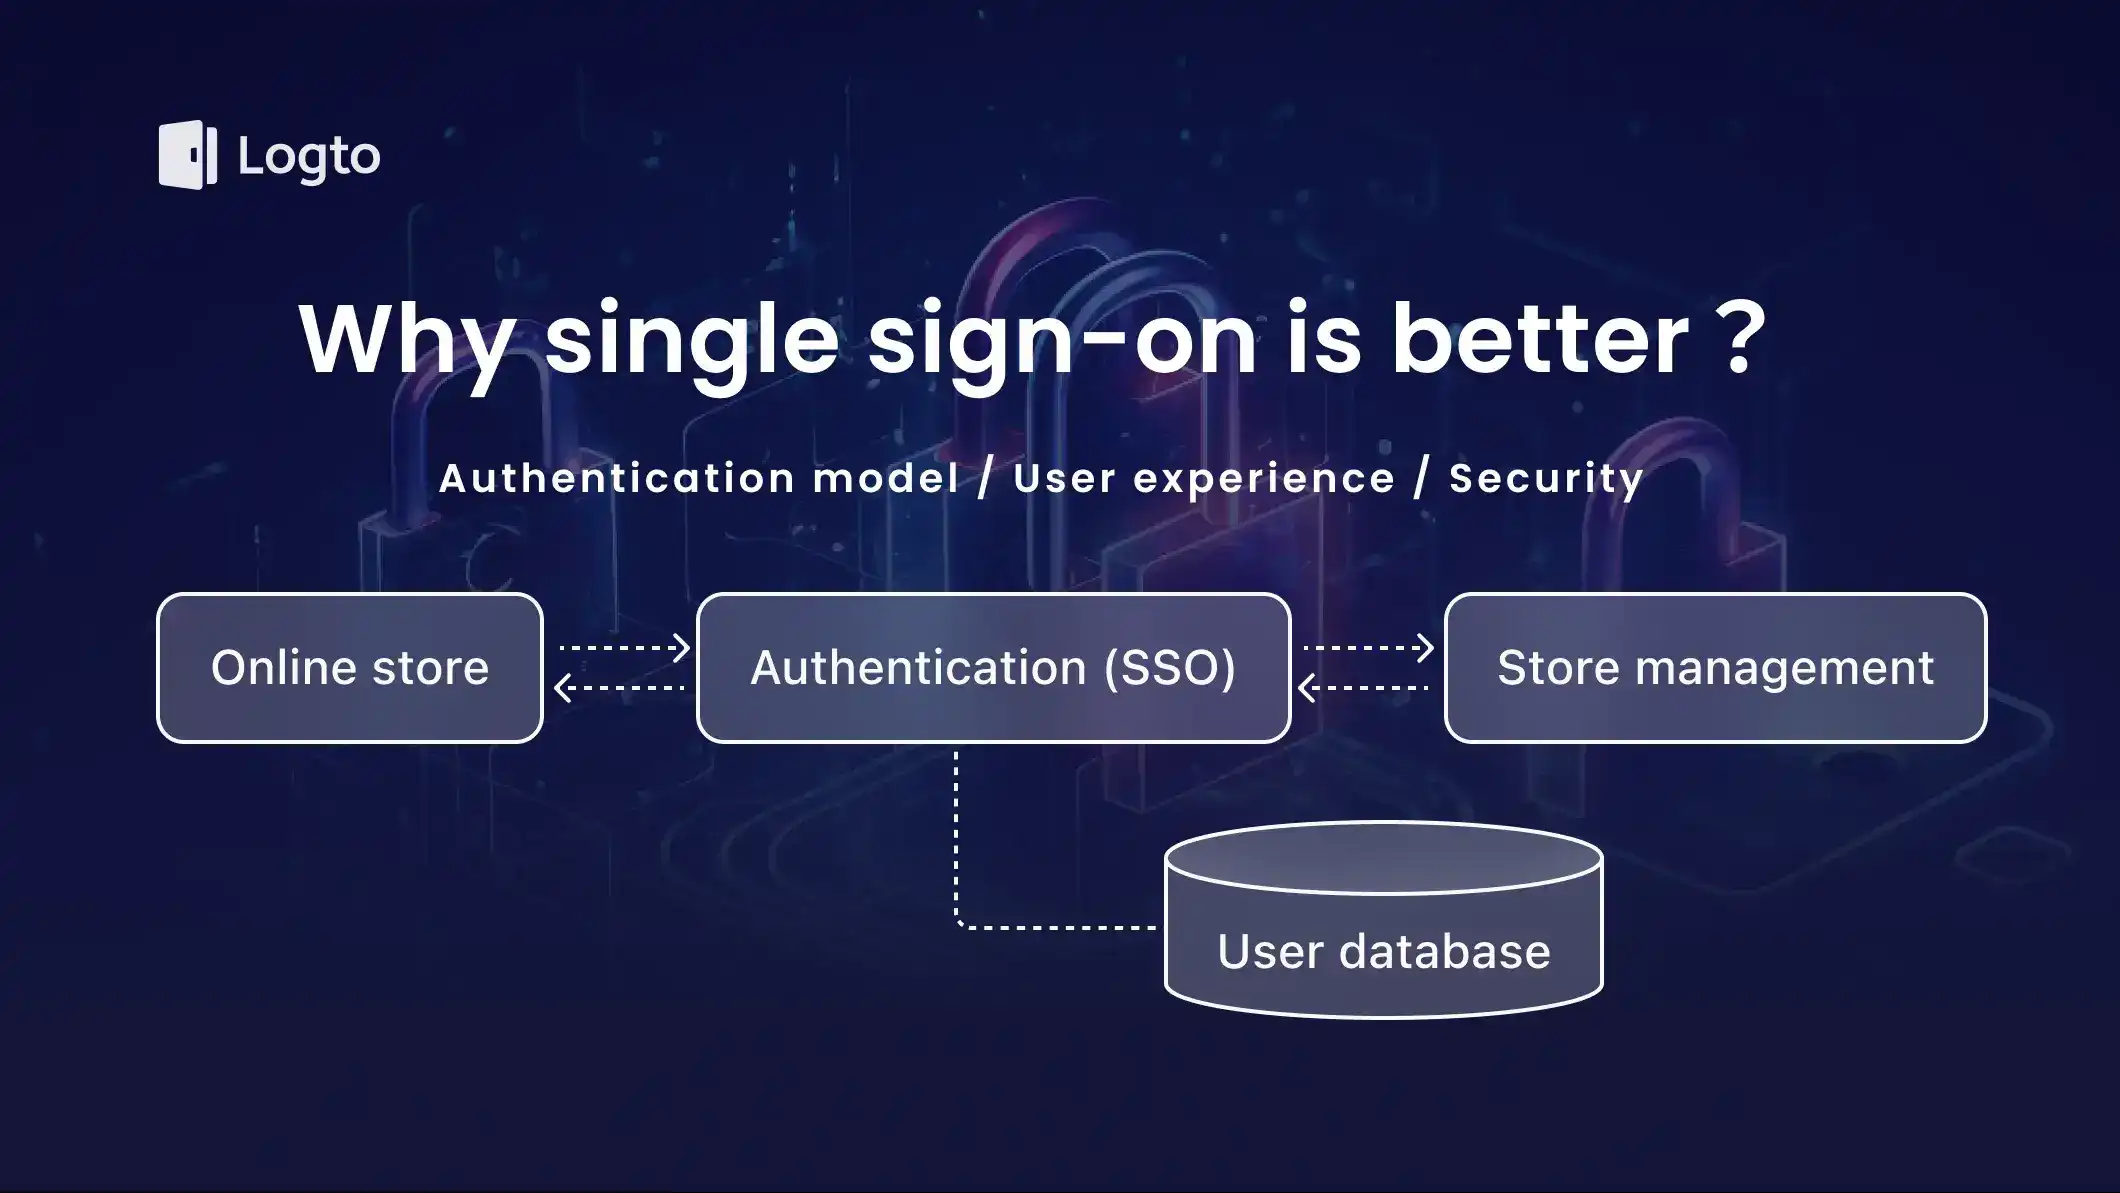 Why single sign-on (SSO) is better